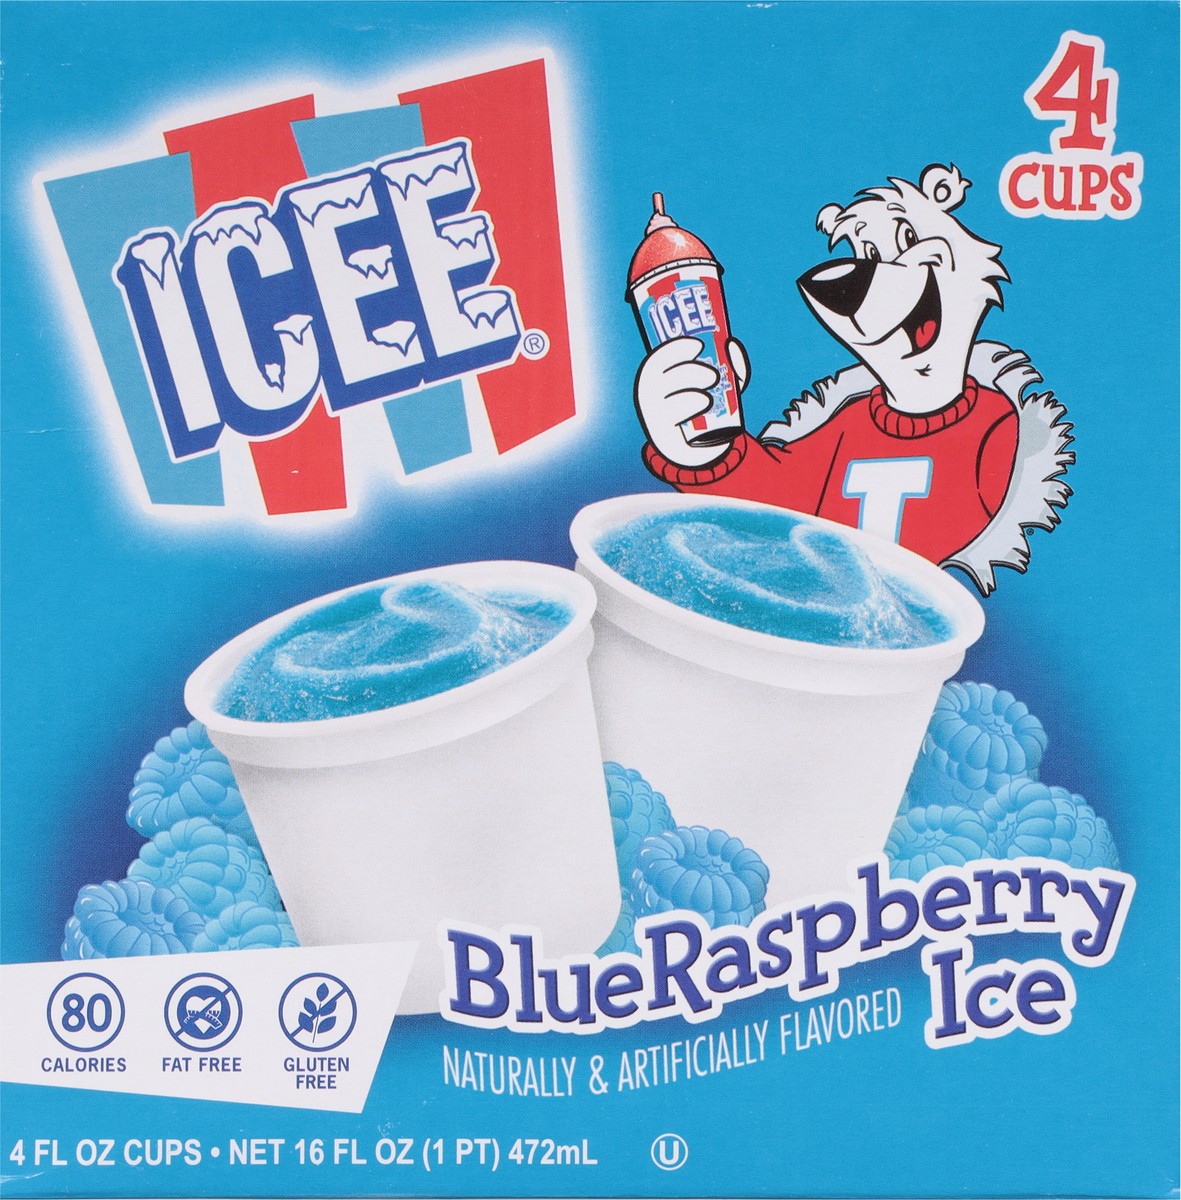 slide 9 of 11, ICEE BlueRaspberry Ice Cups 4 - 4 fl oz Cups, 4 ct